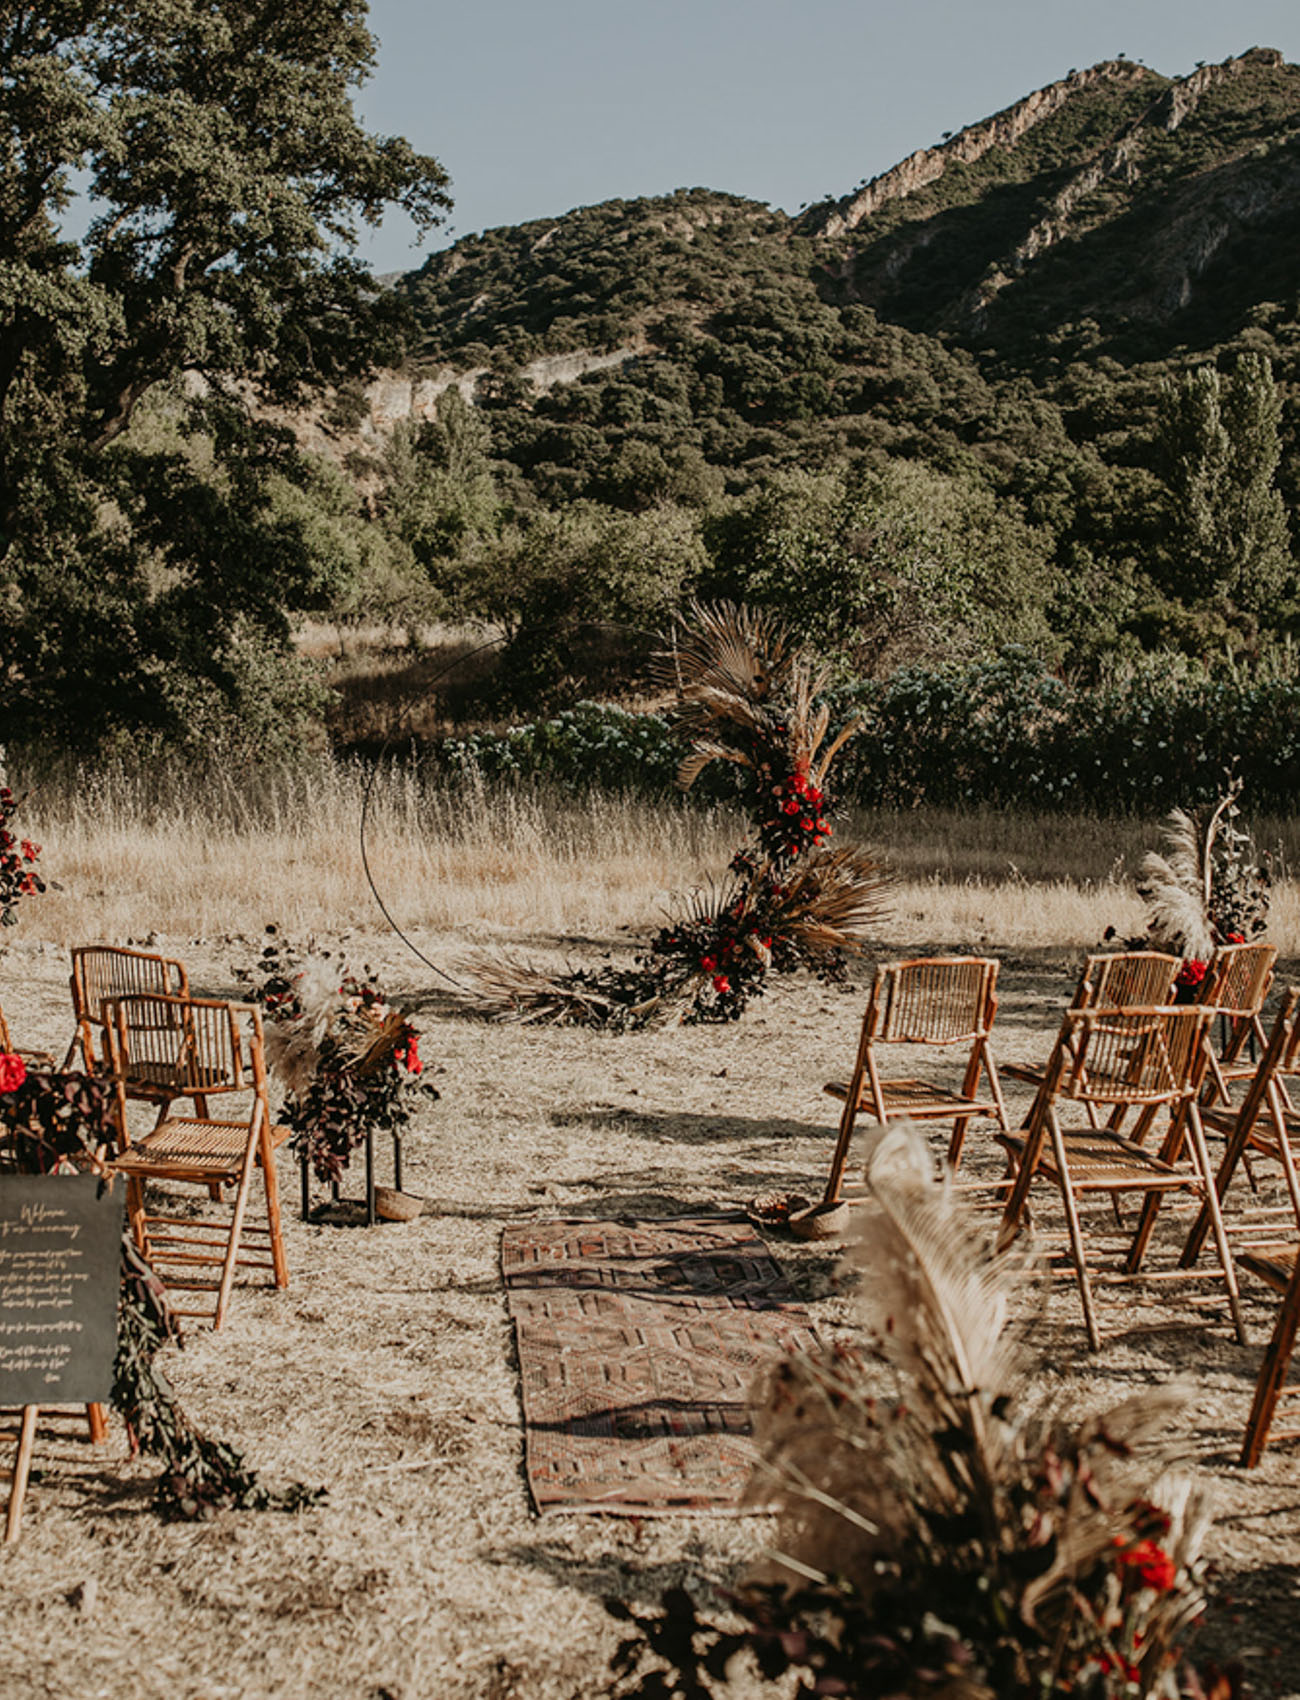 The wedding ceremony space was done with bright blooms, greenery, pampas grass and dried fronds